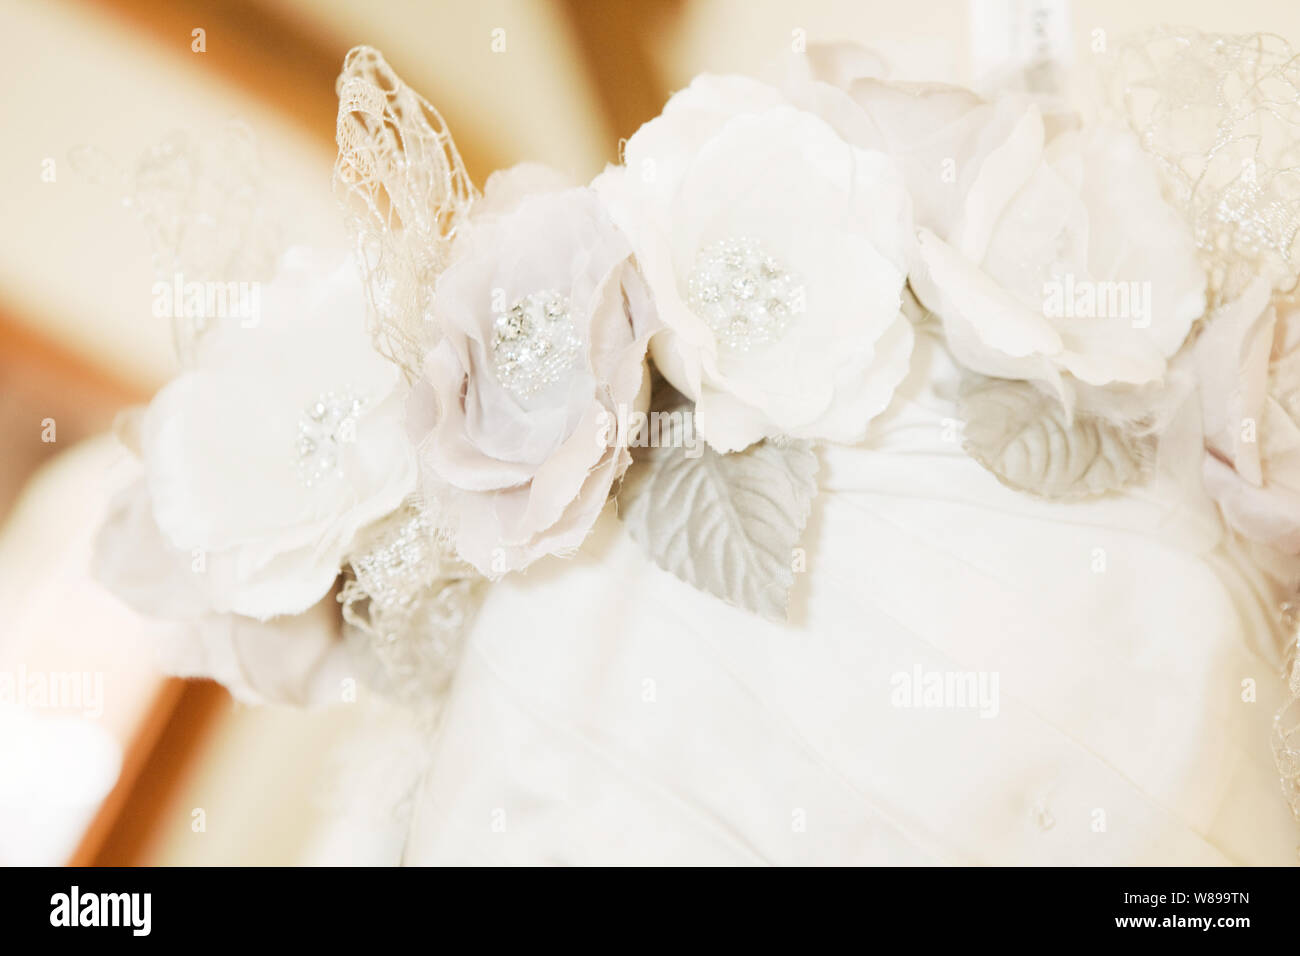 Close Up of Material Flowers on Wedding Dress Stock Photo